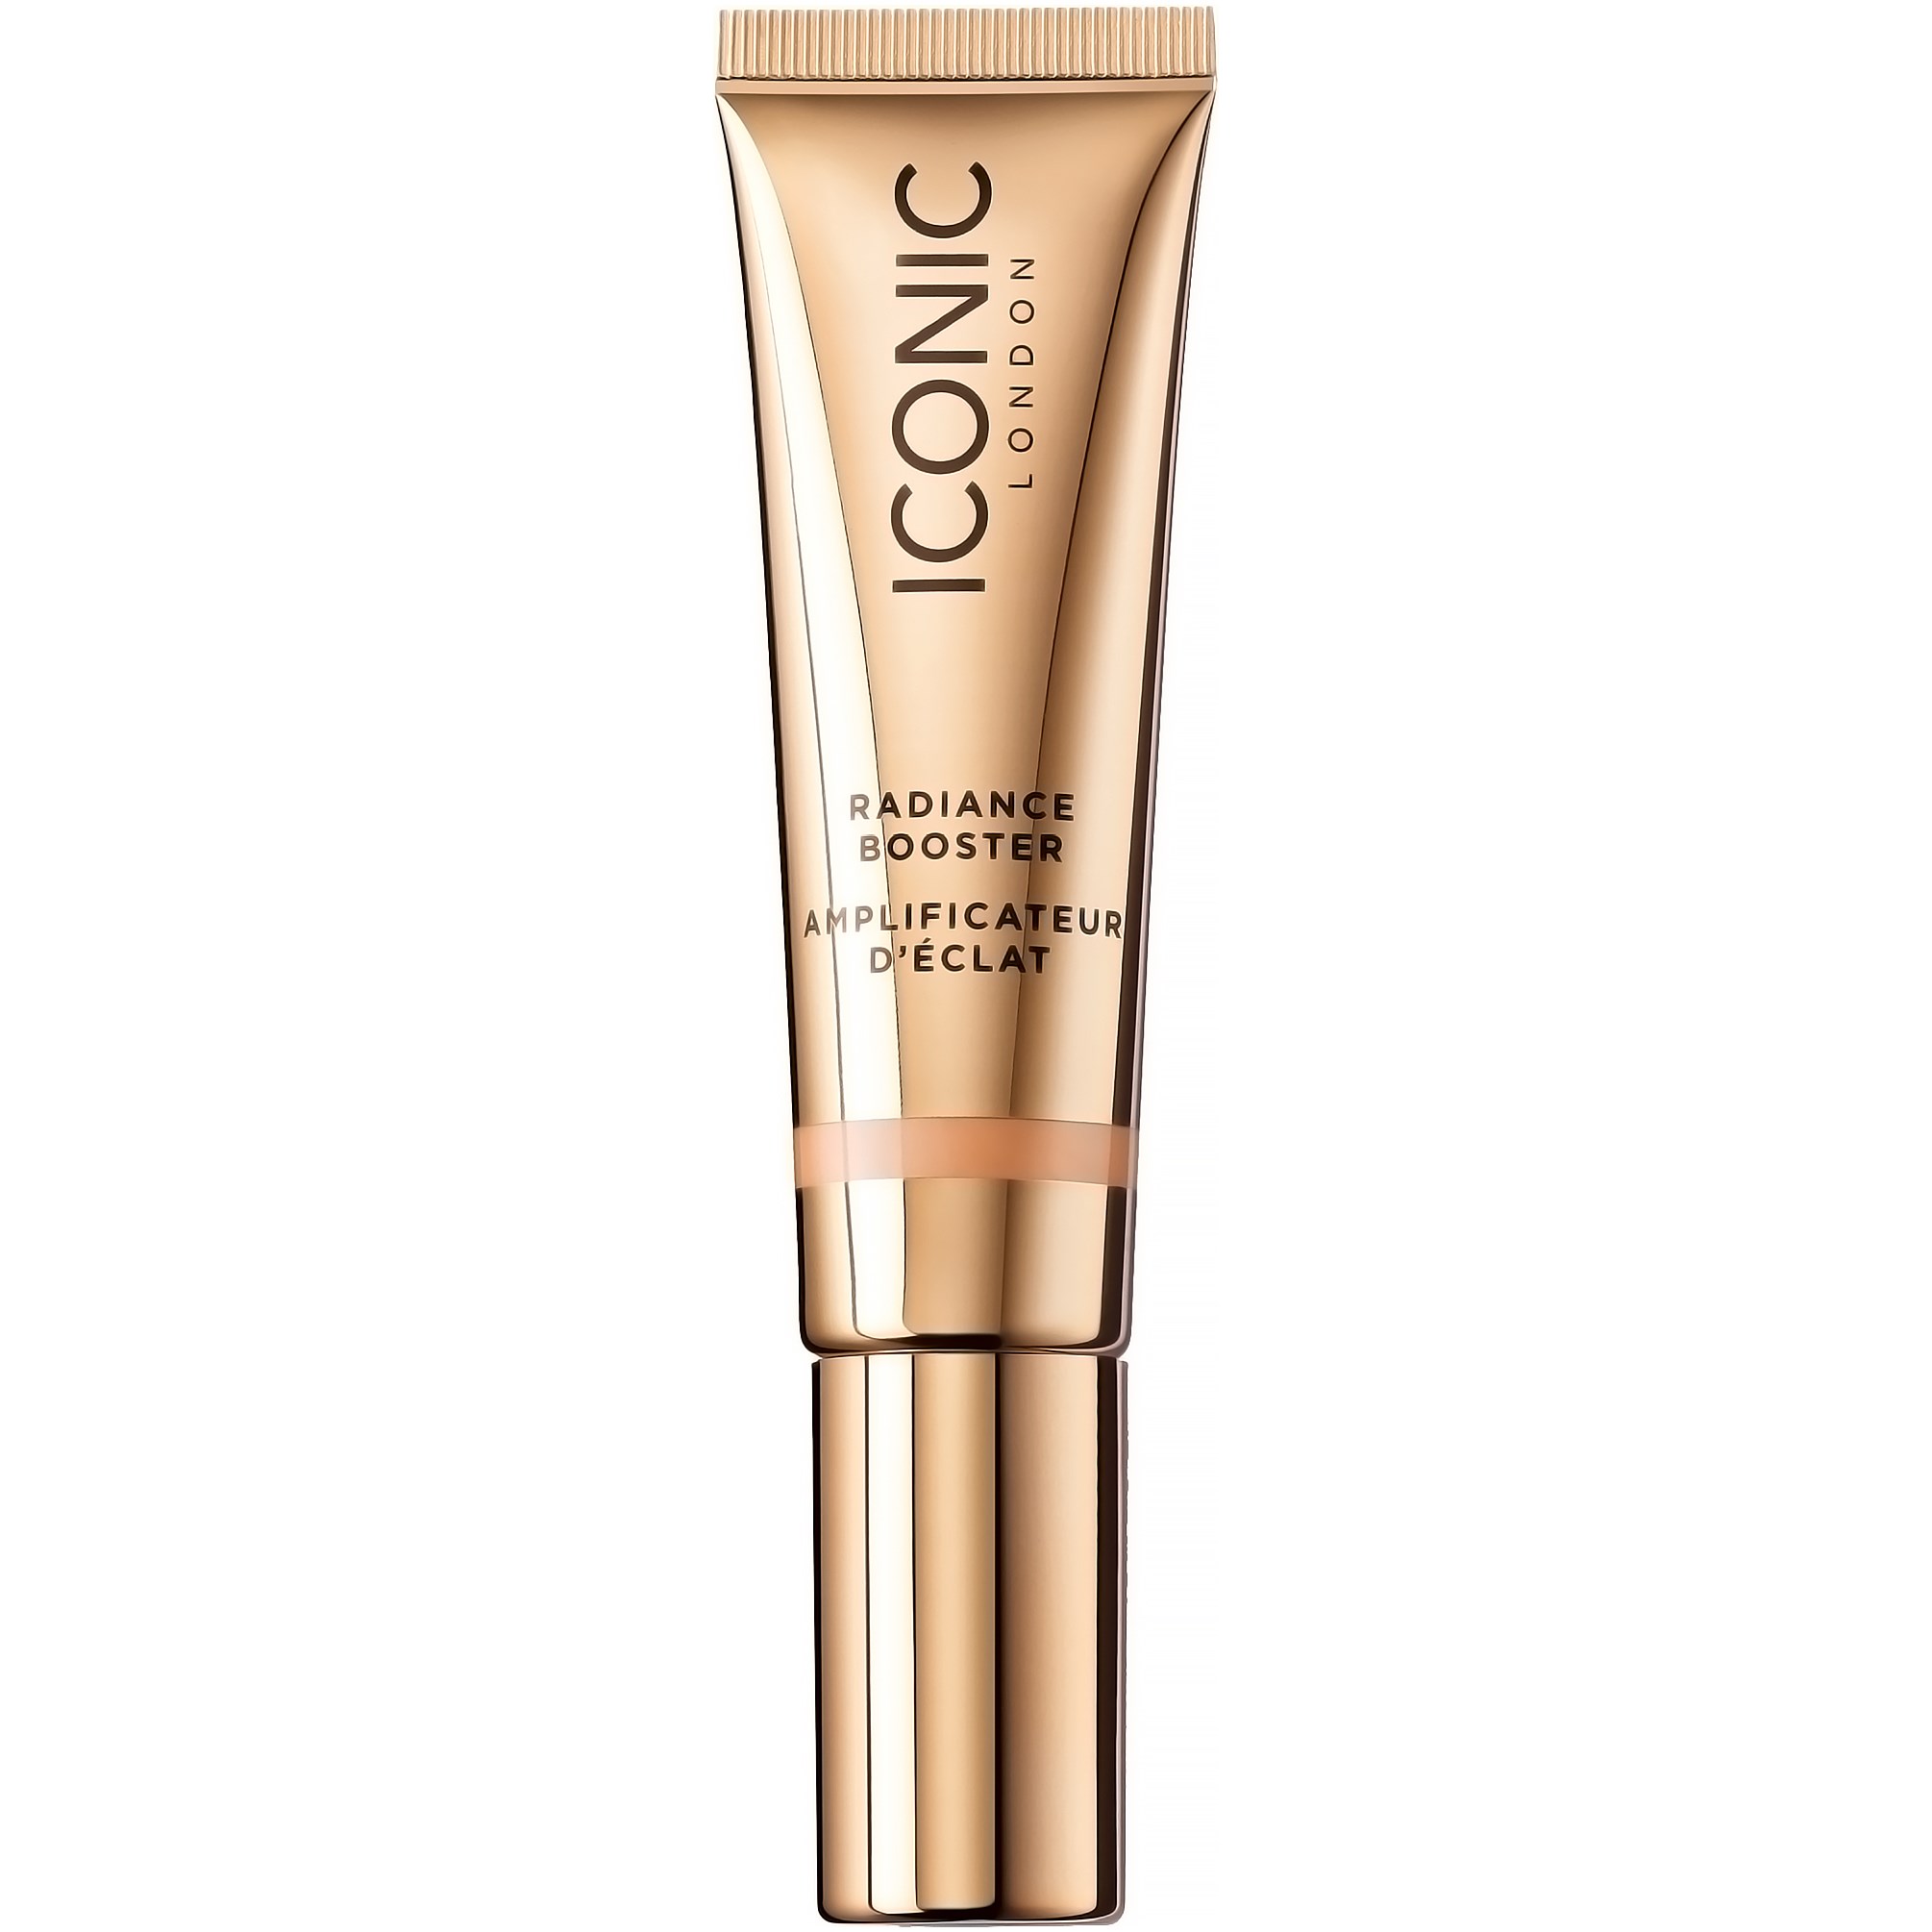 ICONIC London Radiance Booster Champagne Glow